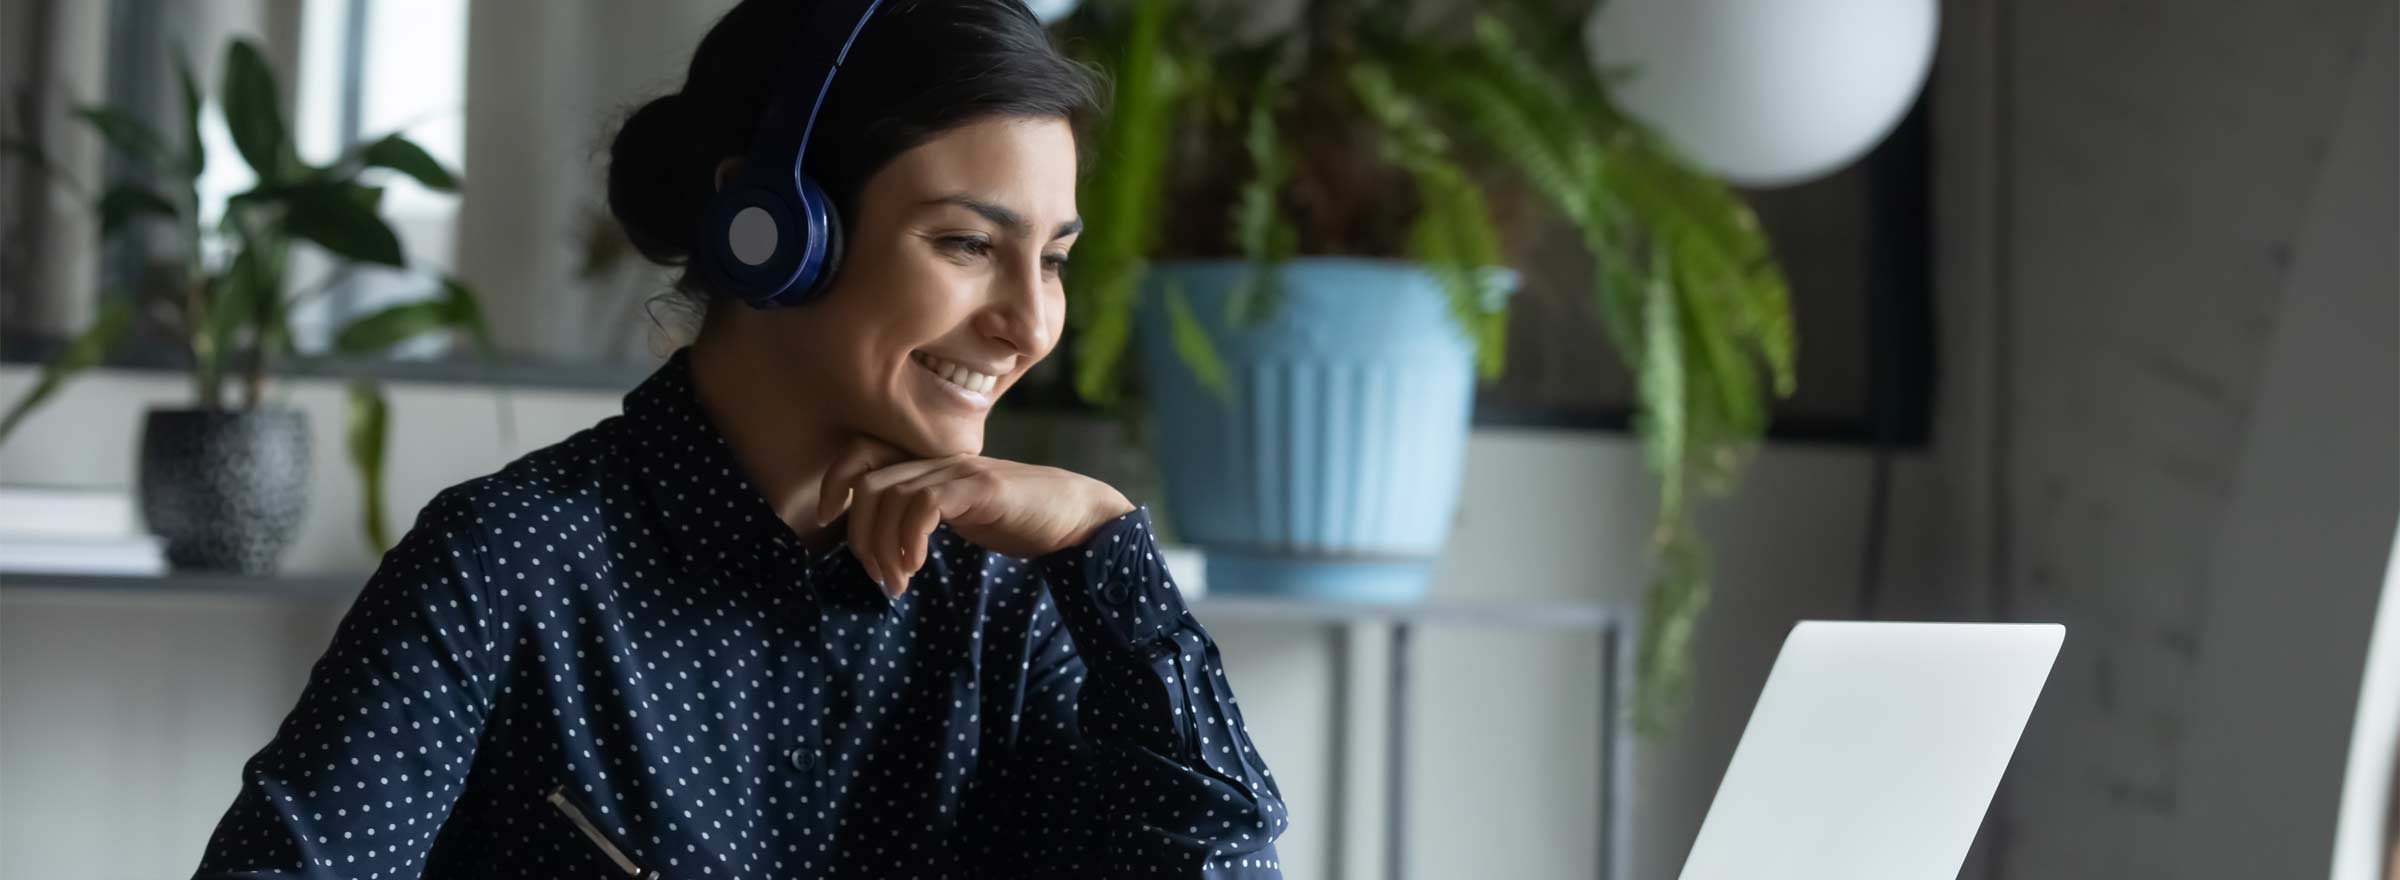 woman with headphones smiling at a computer screen